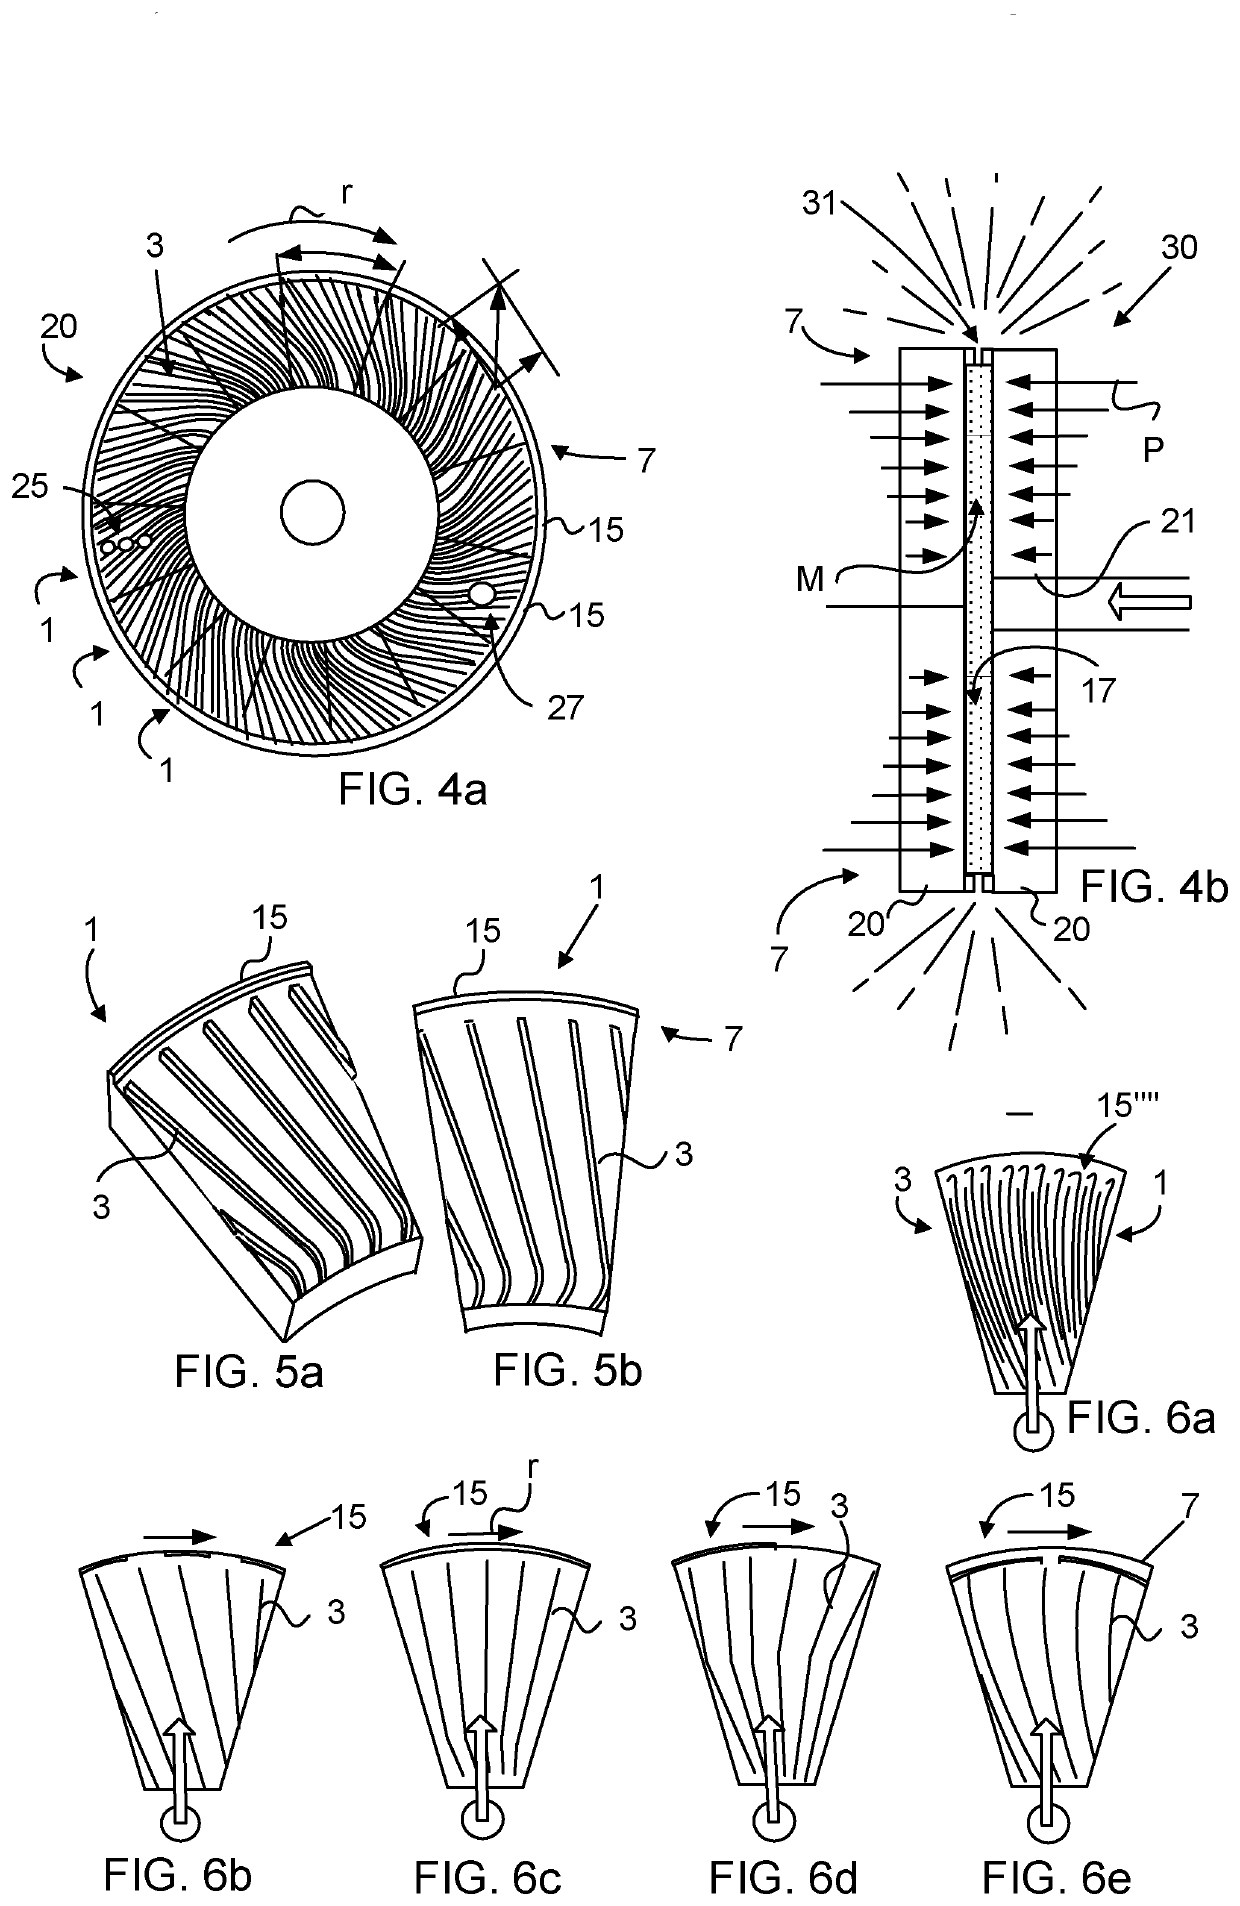 Refiner apparatus and a method for refining cellulosic material